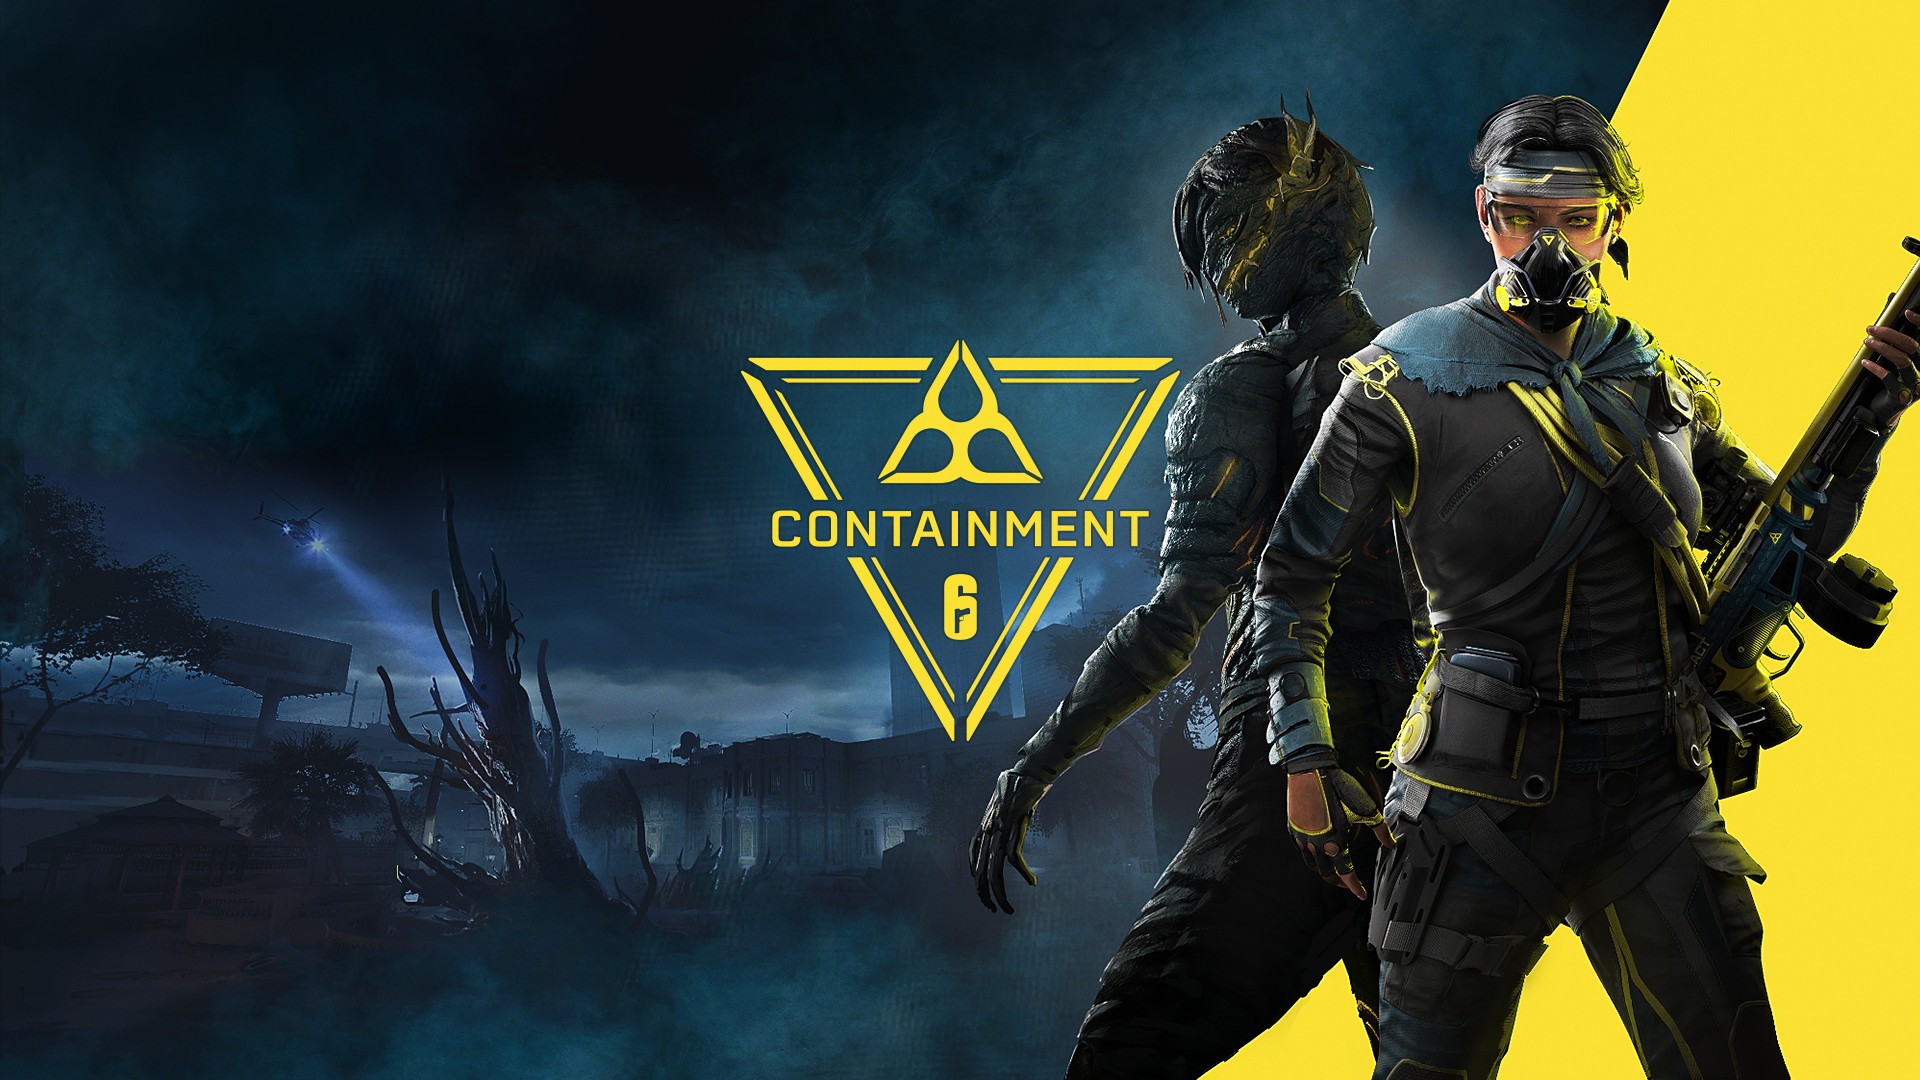 Tom Clancy’s Rainbow Six Siege Reveals Containment Event with New Game Mode